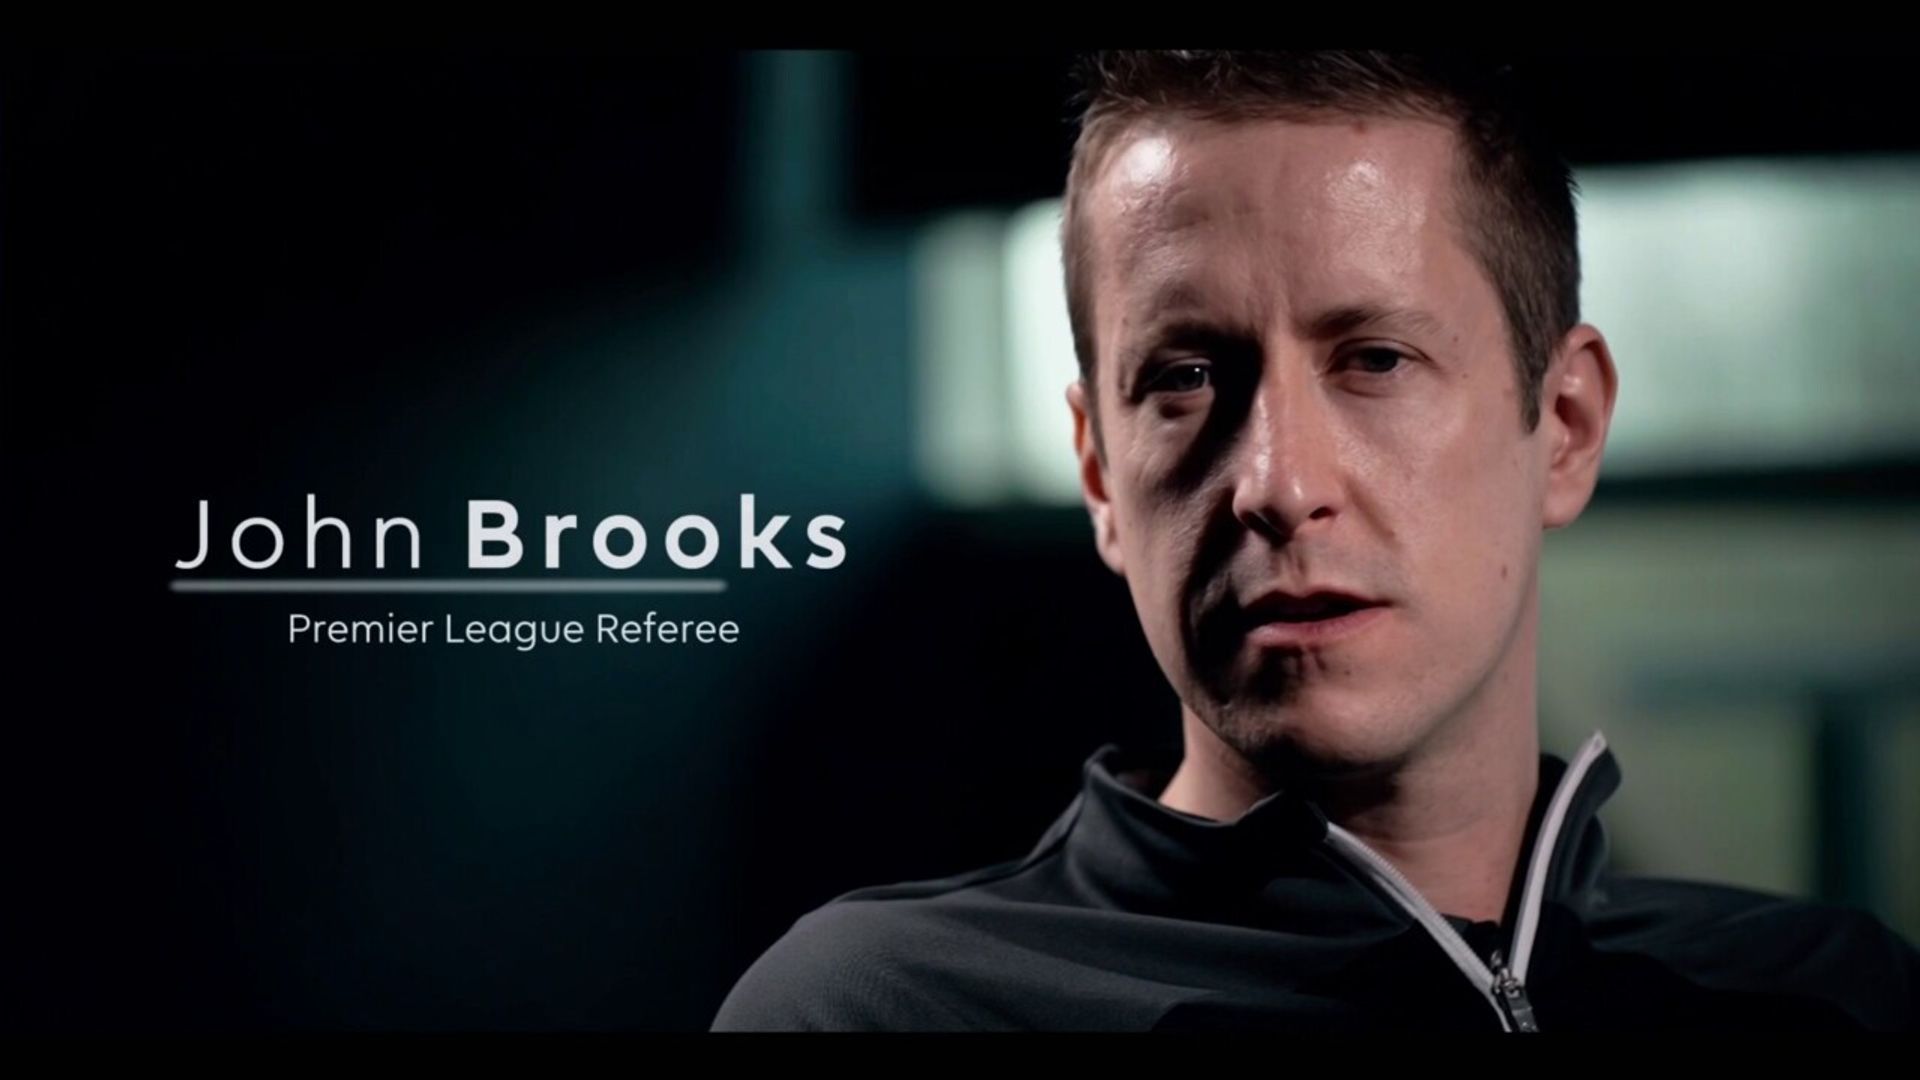 What it's really like to be a Premier League referee